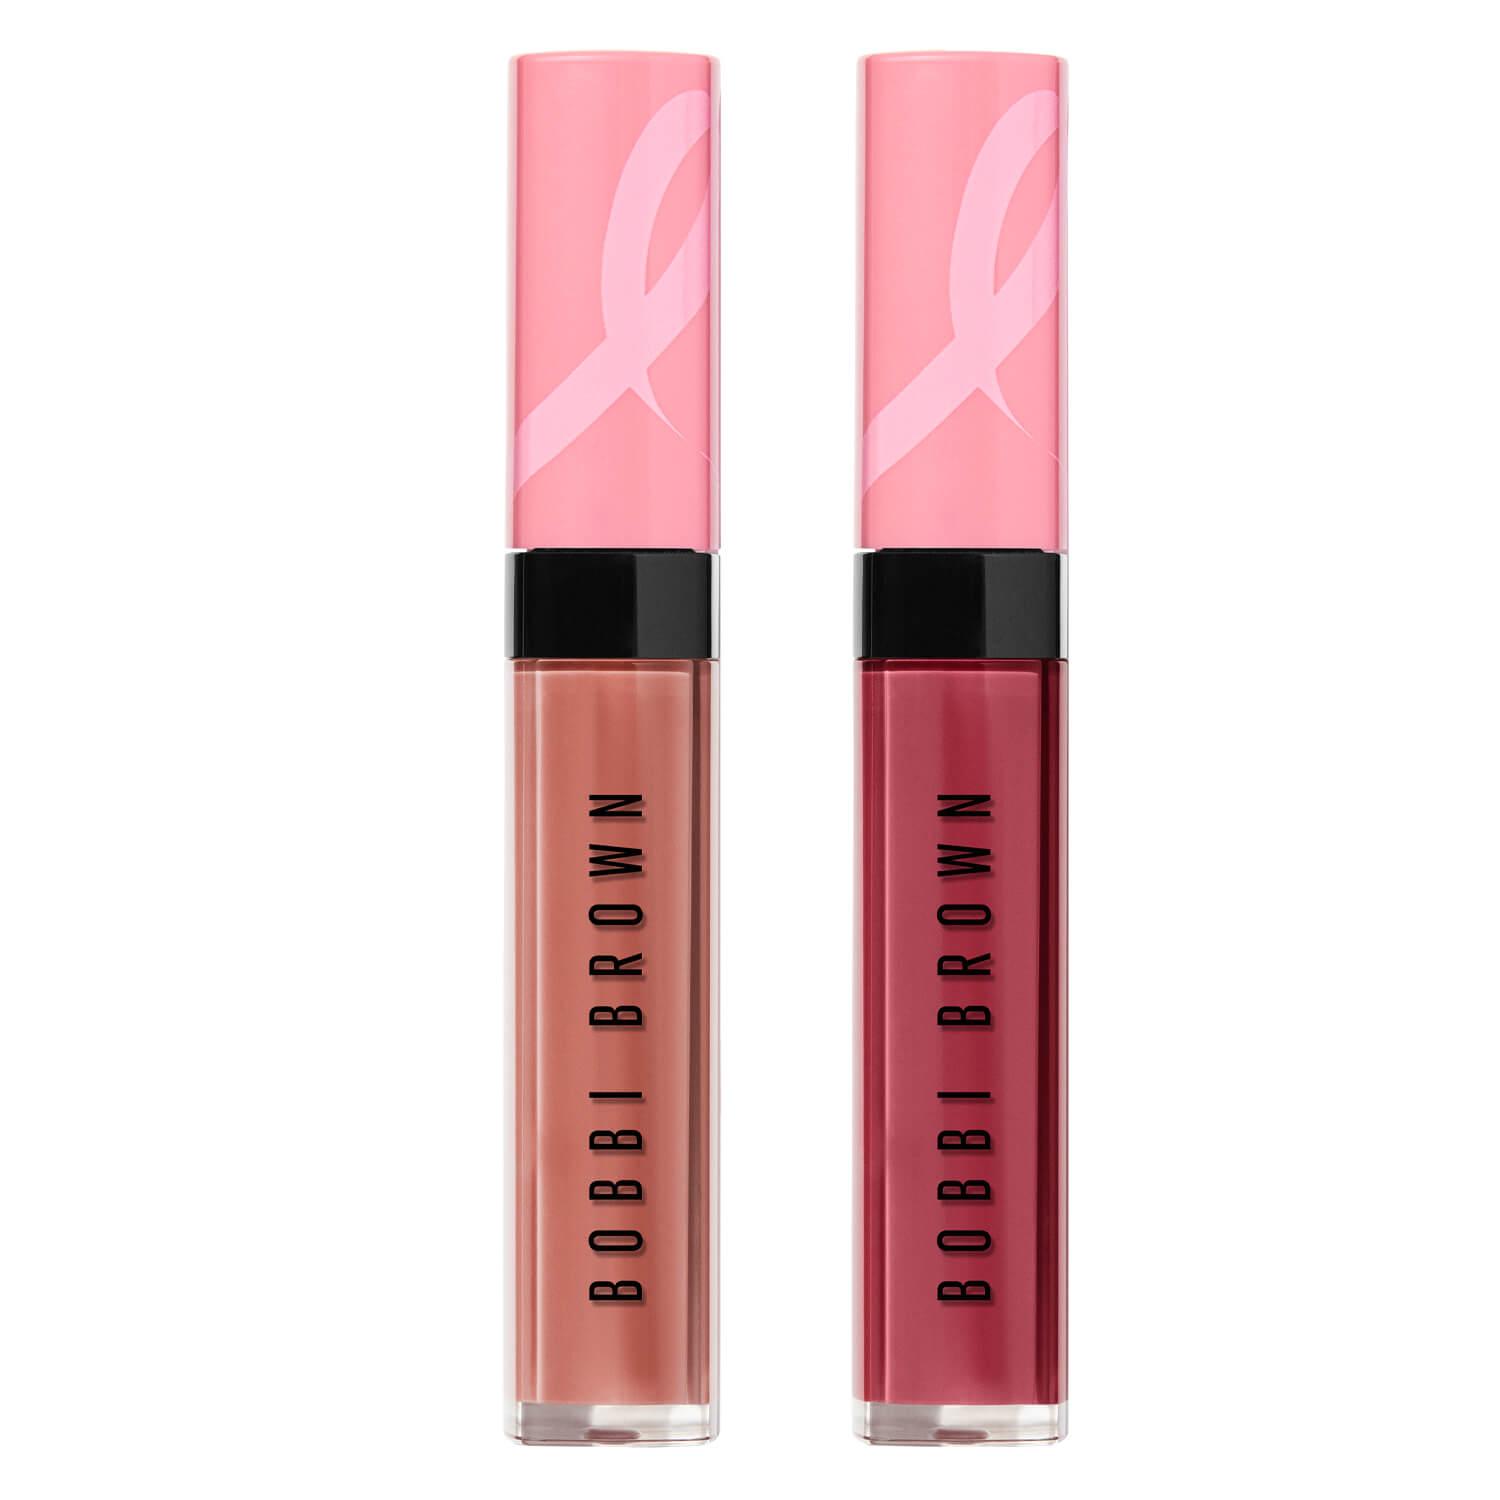 BB Specials - Powerful Pinks Crushed Oil-Infused Gloss Duo